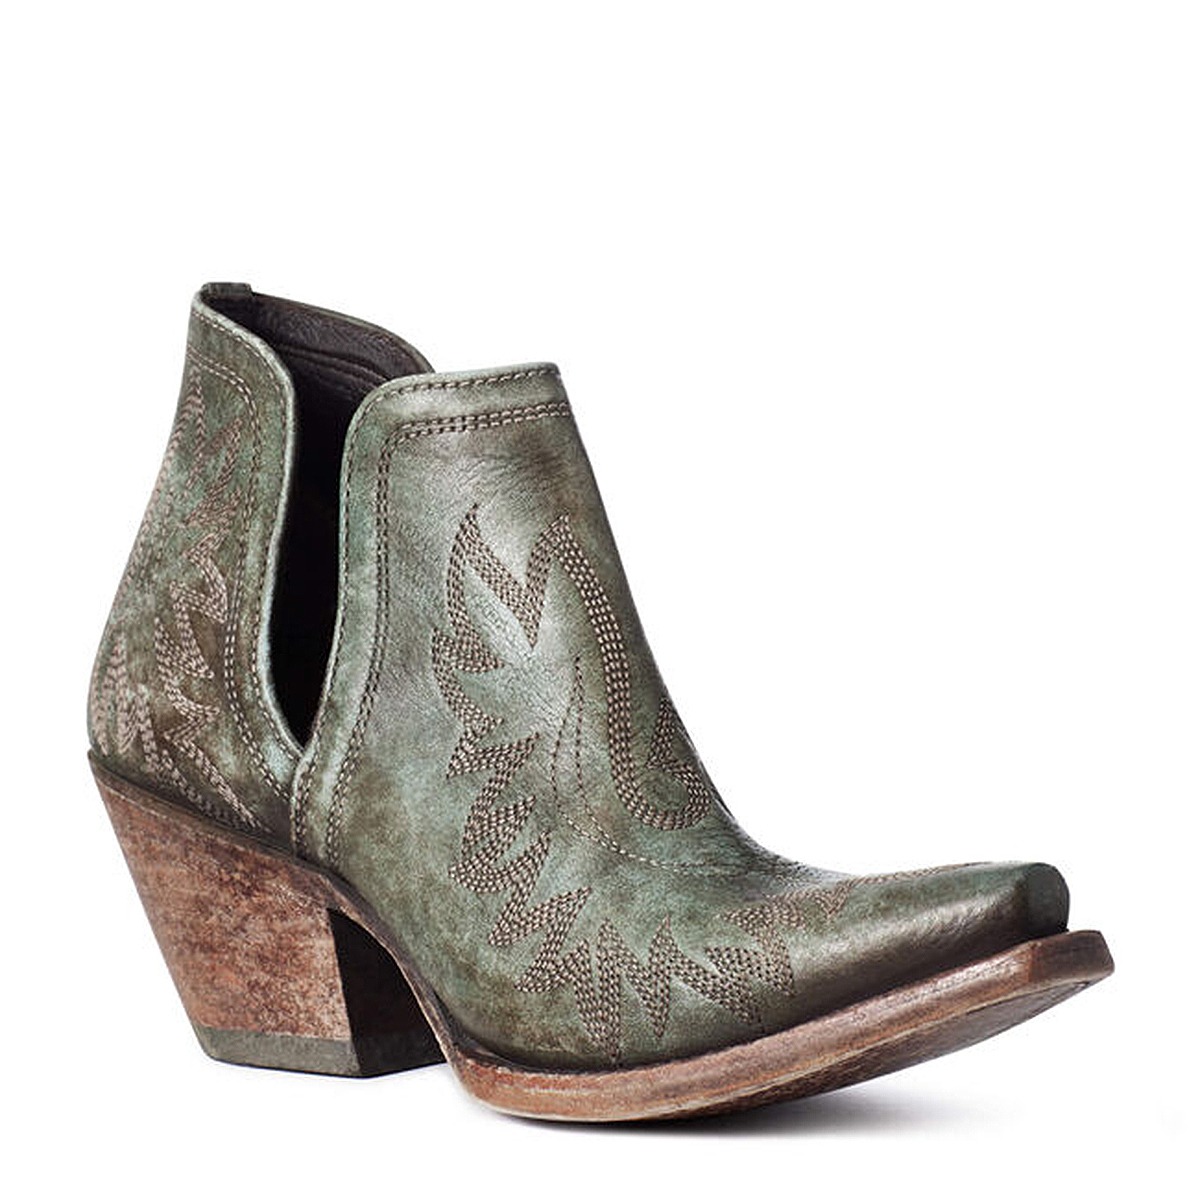 Completely Crush Old-West Style With Ariat's Handmade Dixon Booties